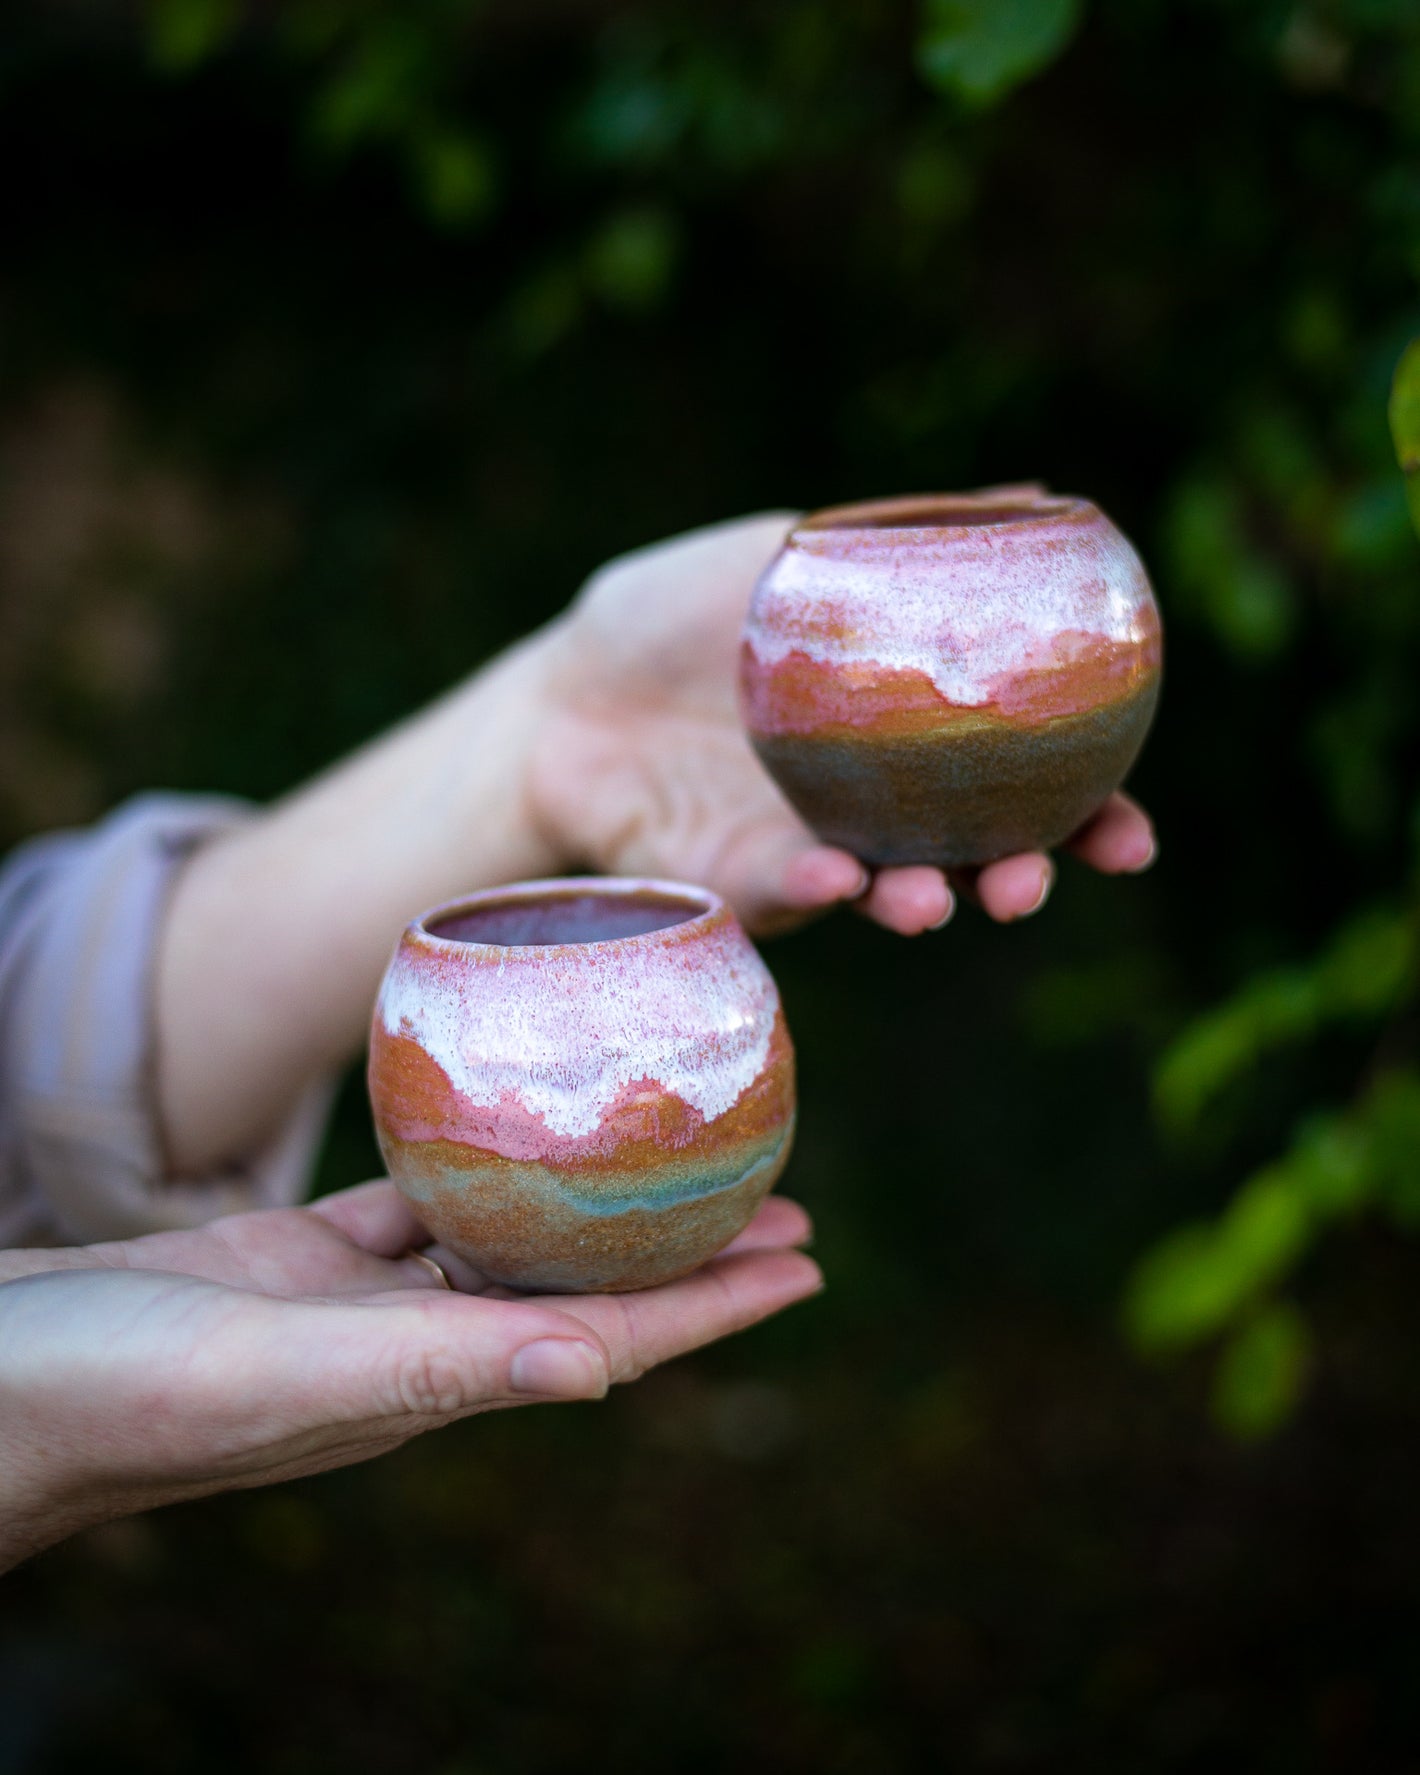 Desert Sunrise cacao cups which are beautiful functional pottery pieces by Dirtbag Ceramics. Inspired from the Pacific Crest Trail (PCT) and Continental Divide Trail (CDT)